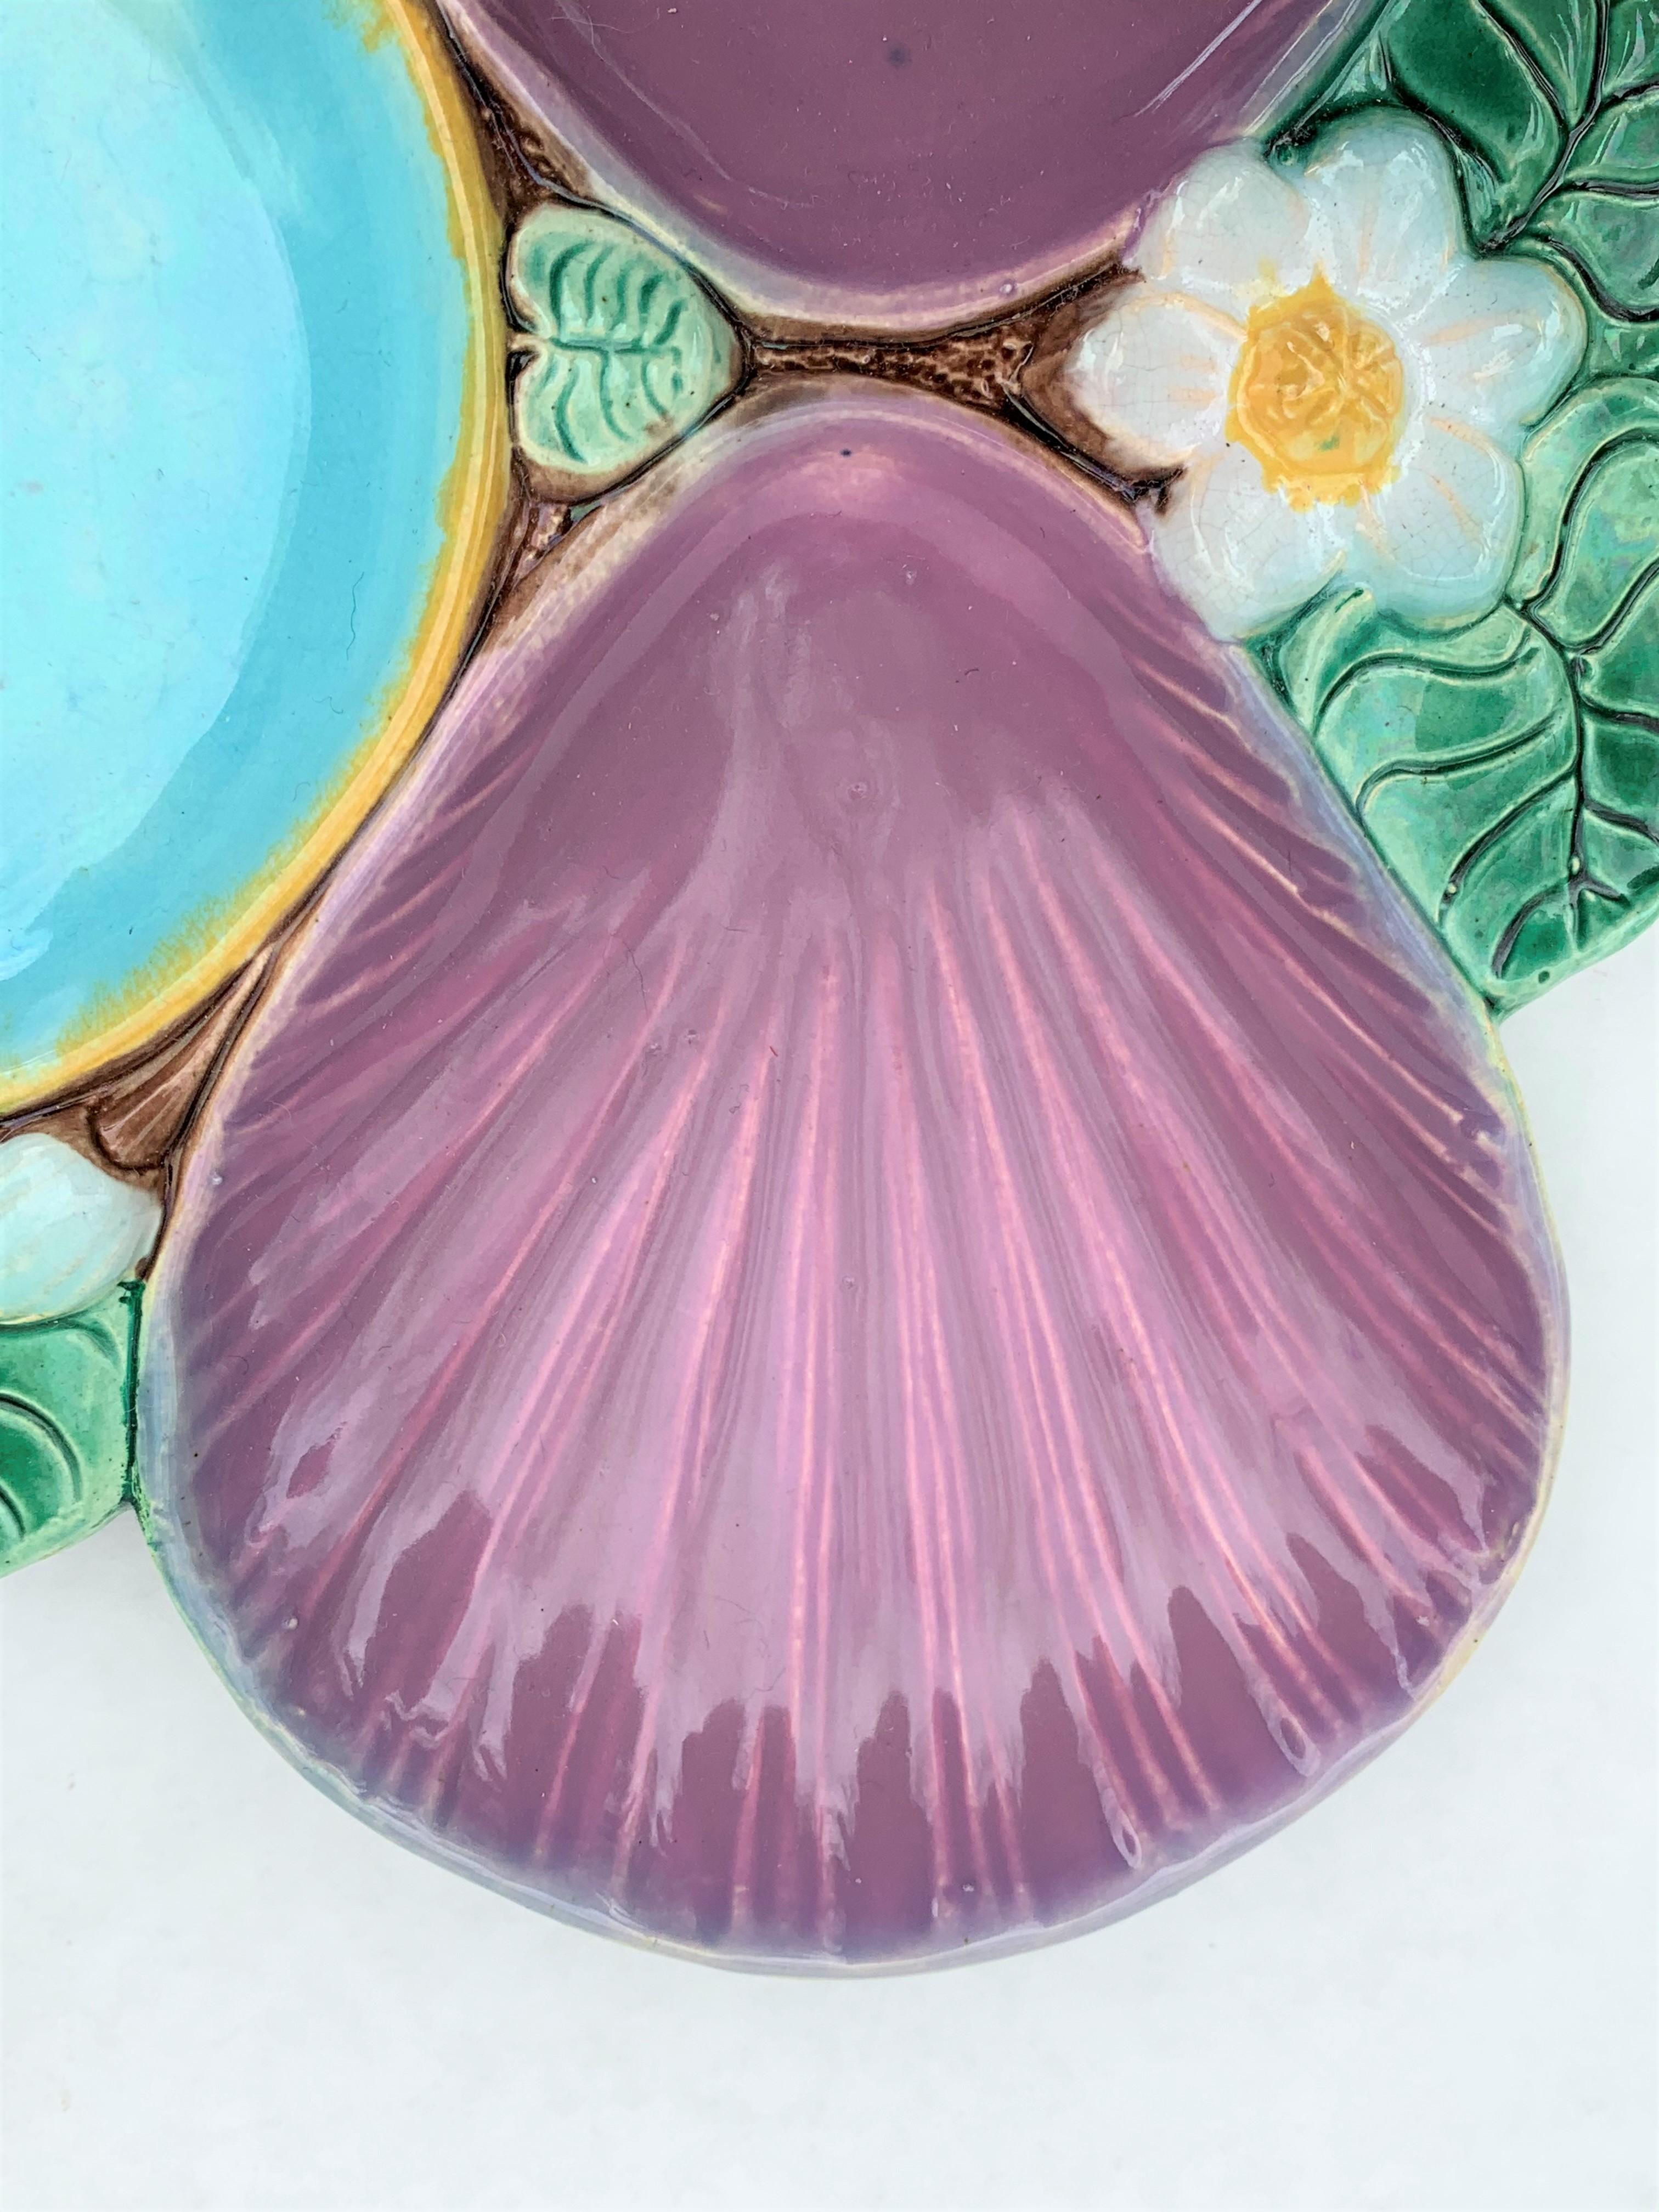 Holdcroft Majolica oyster plate, English, circa 1875, Pond Lily pattern, the wells glazed in deep pink with a hue of lavender.
Outstanding coloration and condition. No damage, repair or restoration. An extraordinary example of this well-known